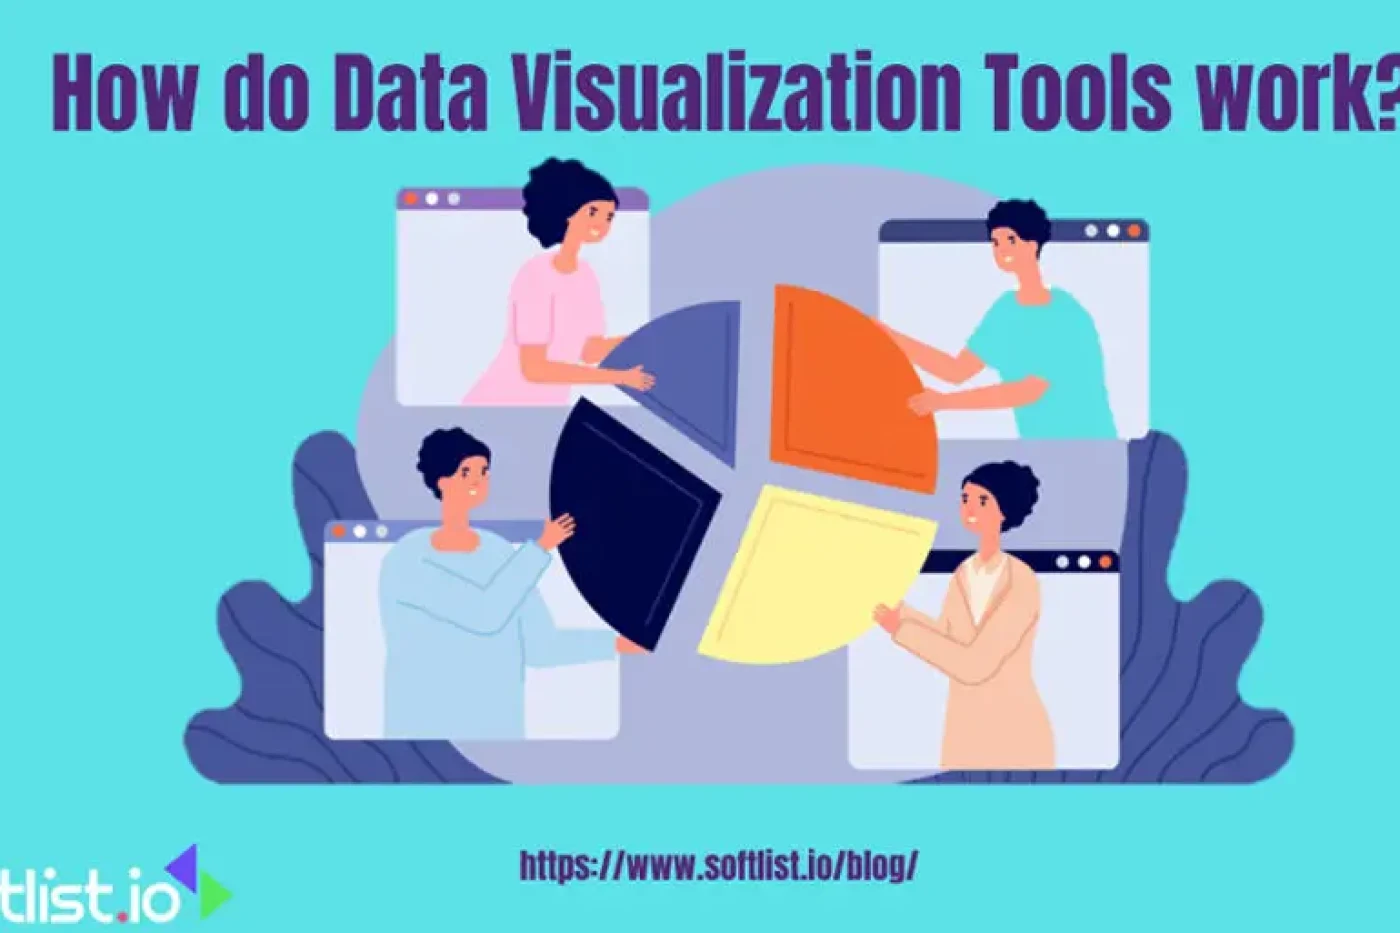 Discovering the Components of Data Visualization Tools